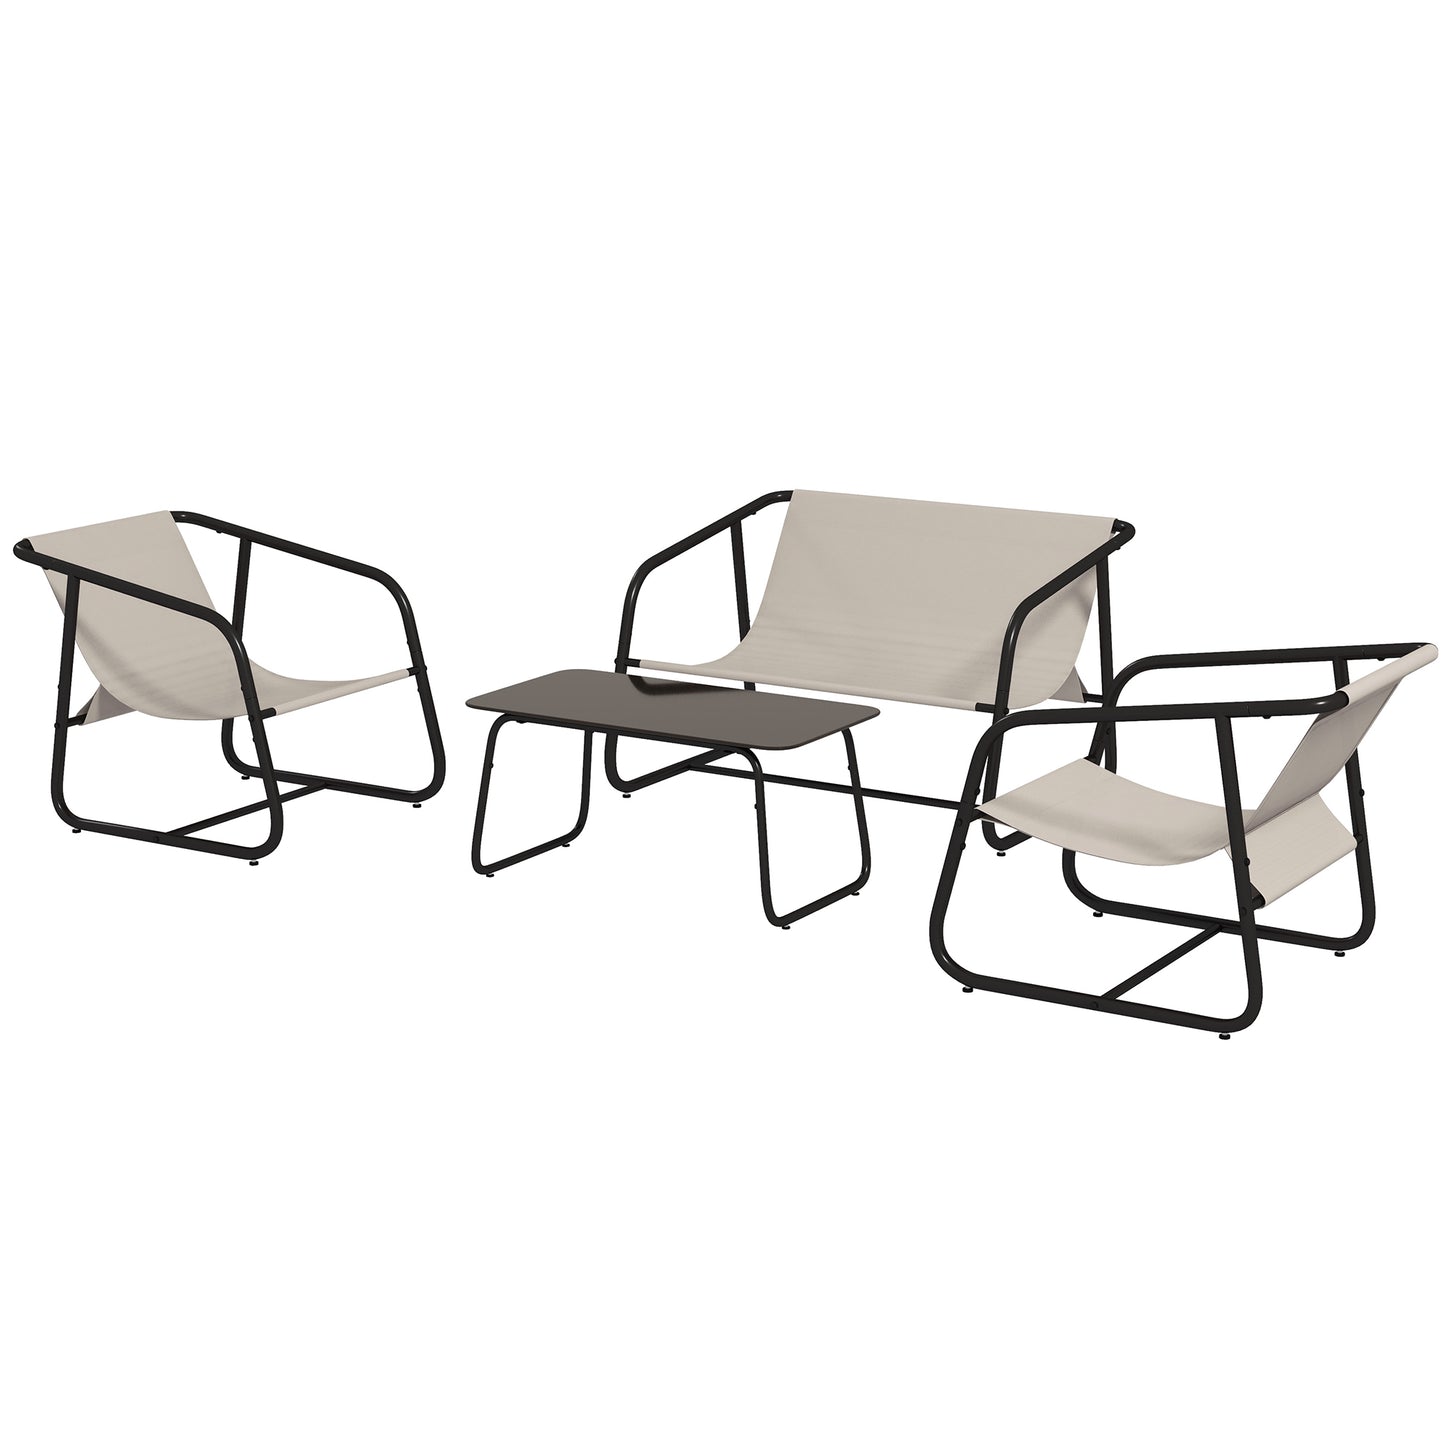 Outsunny Garden Sofa Set, 4 Piece Patio Conversation Furniture Set with Glass Table, Breathable Mesh, Cream White